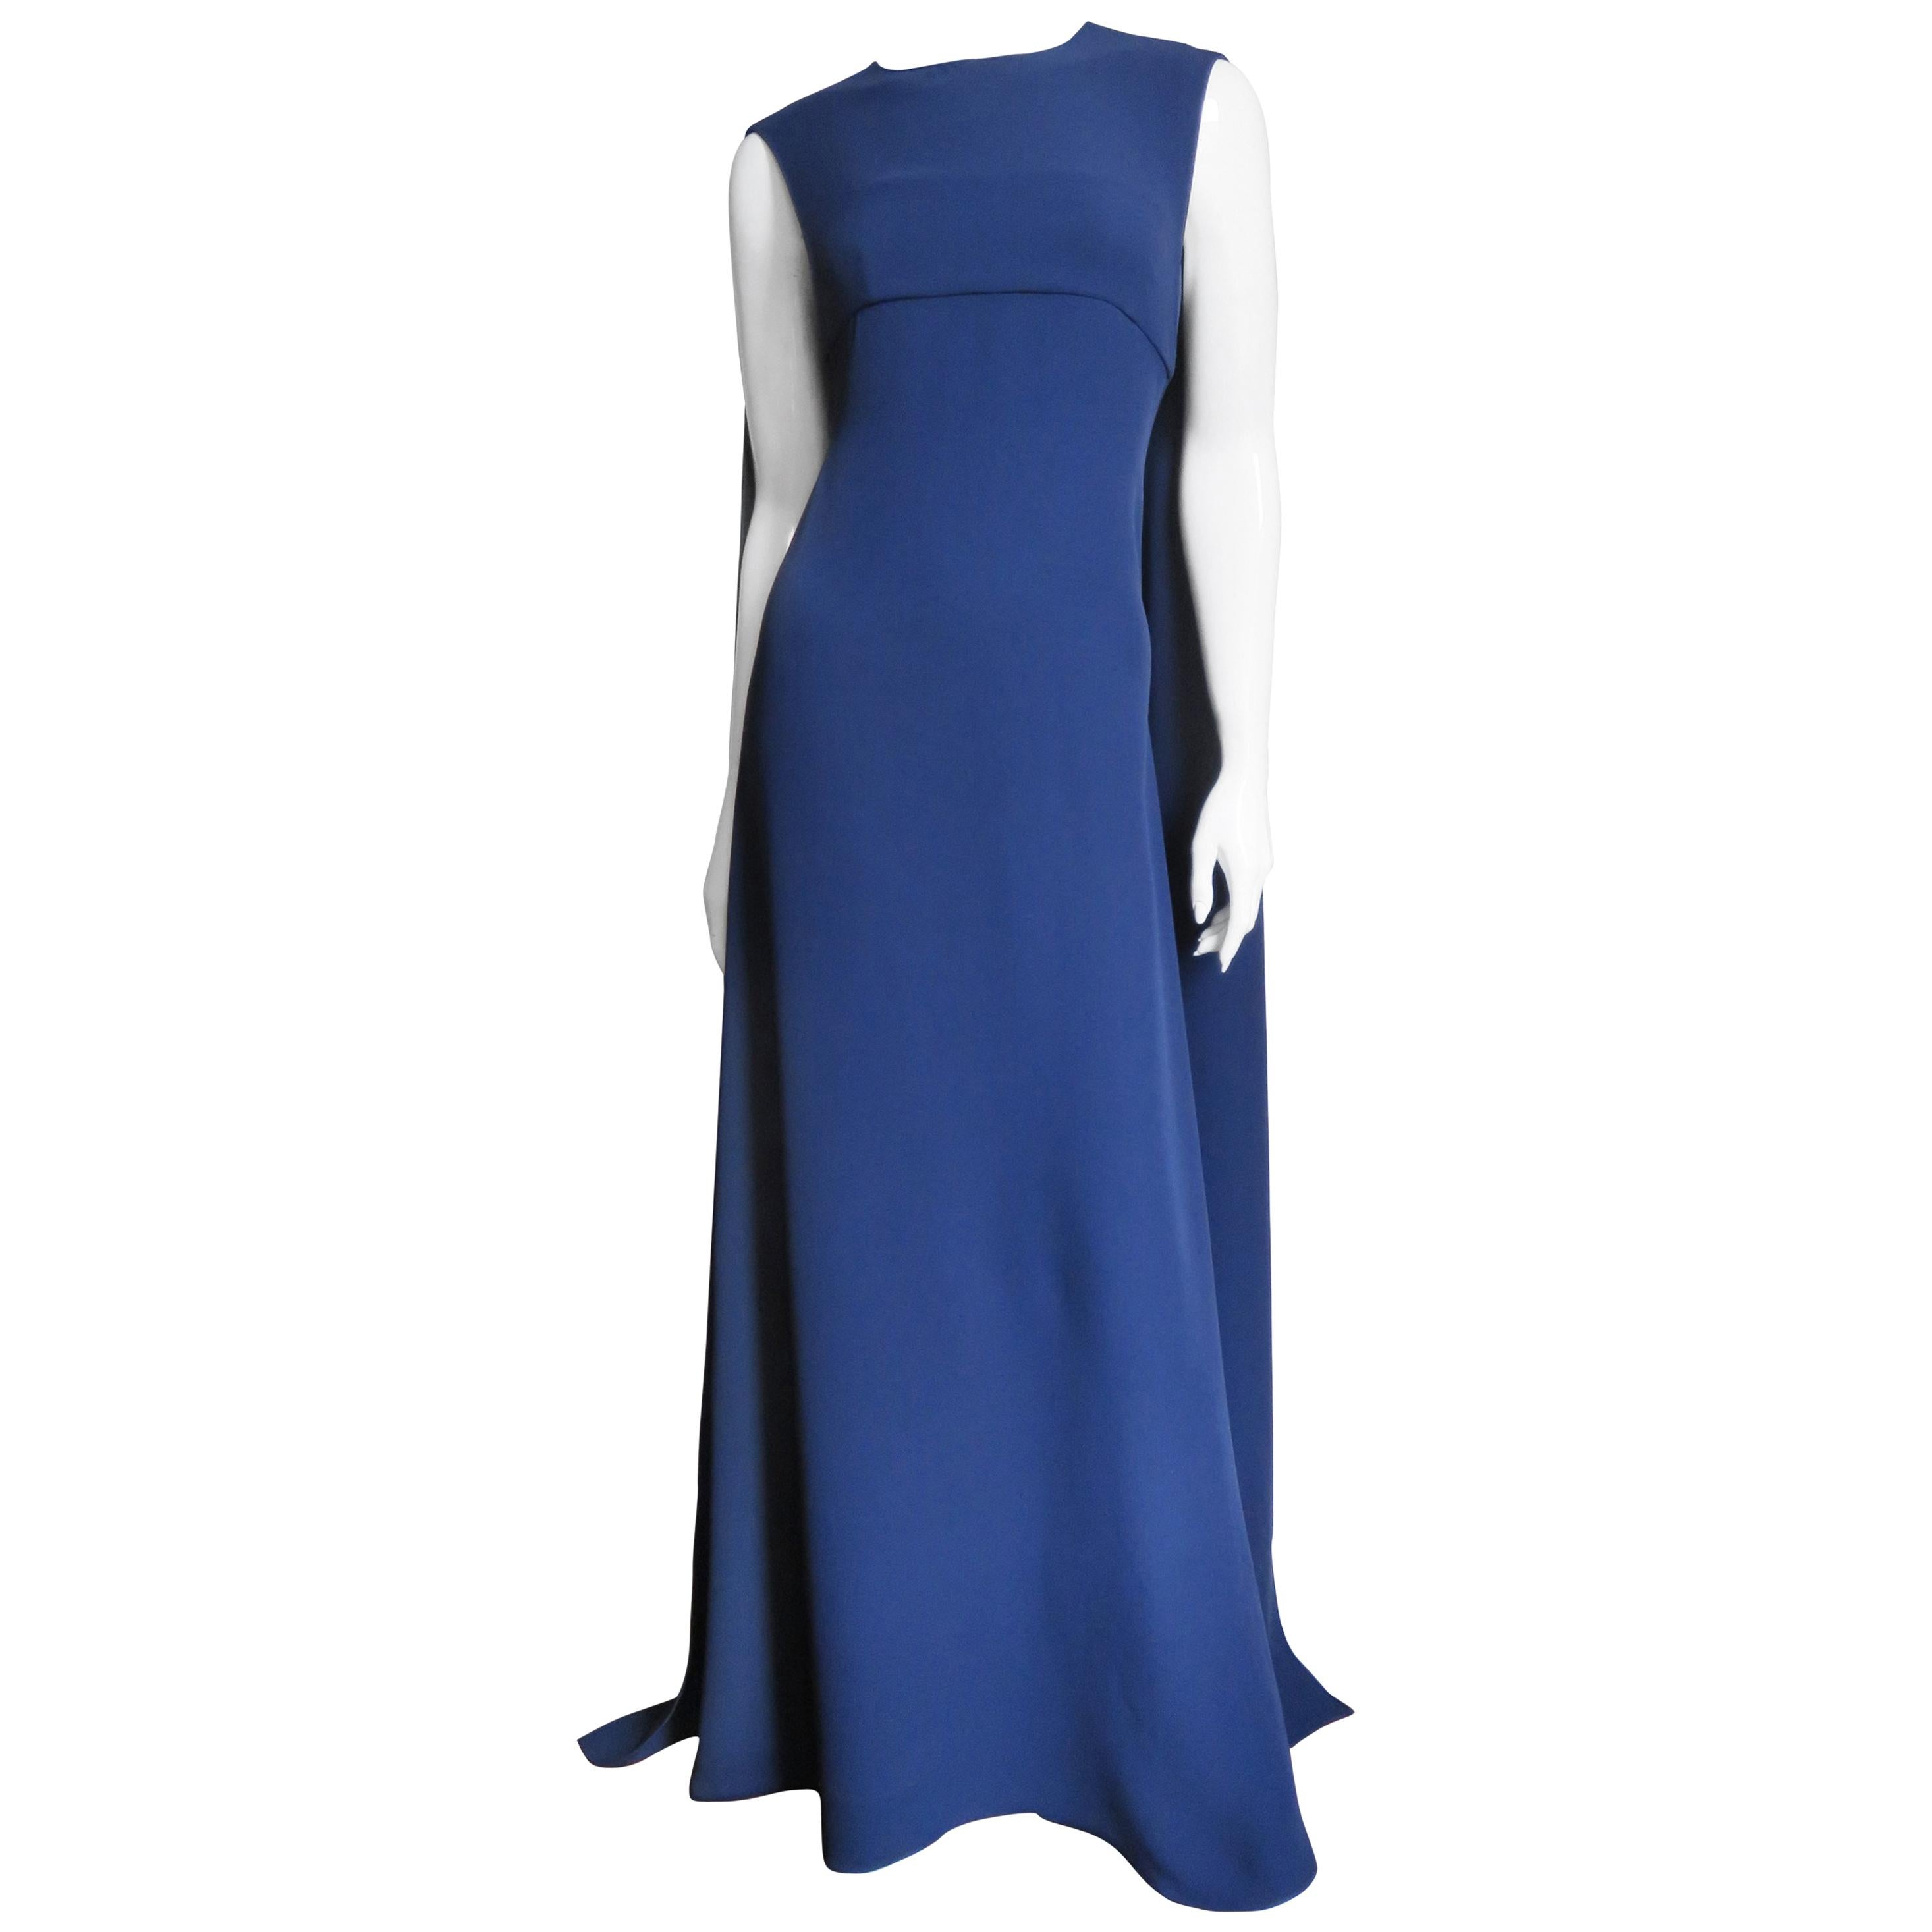 A fabulous navy blue silk cape dress from Valentino.  It is sleeveless with a panel forming a cape draping over the shoulders in the back closing at the neck with a keyhole and self covered button and loop above it. The dress is fitted with light